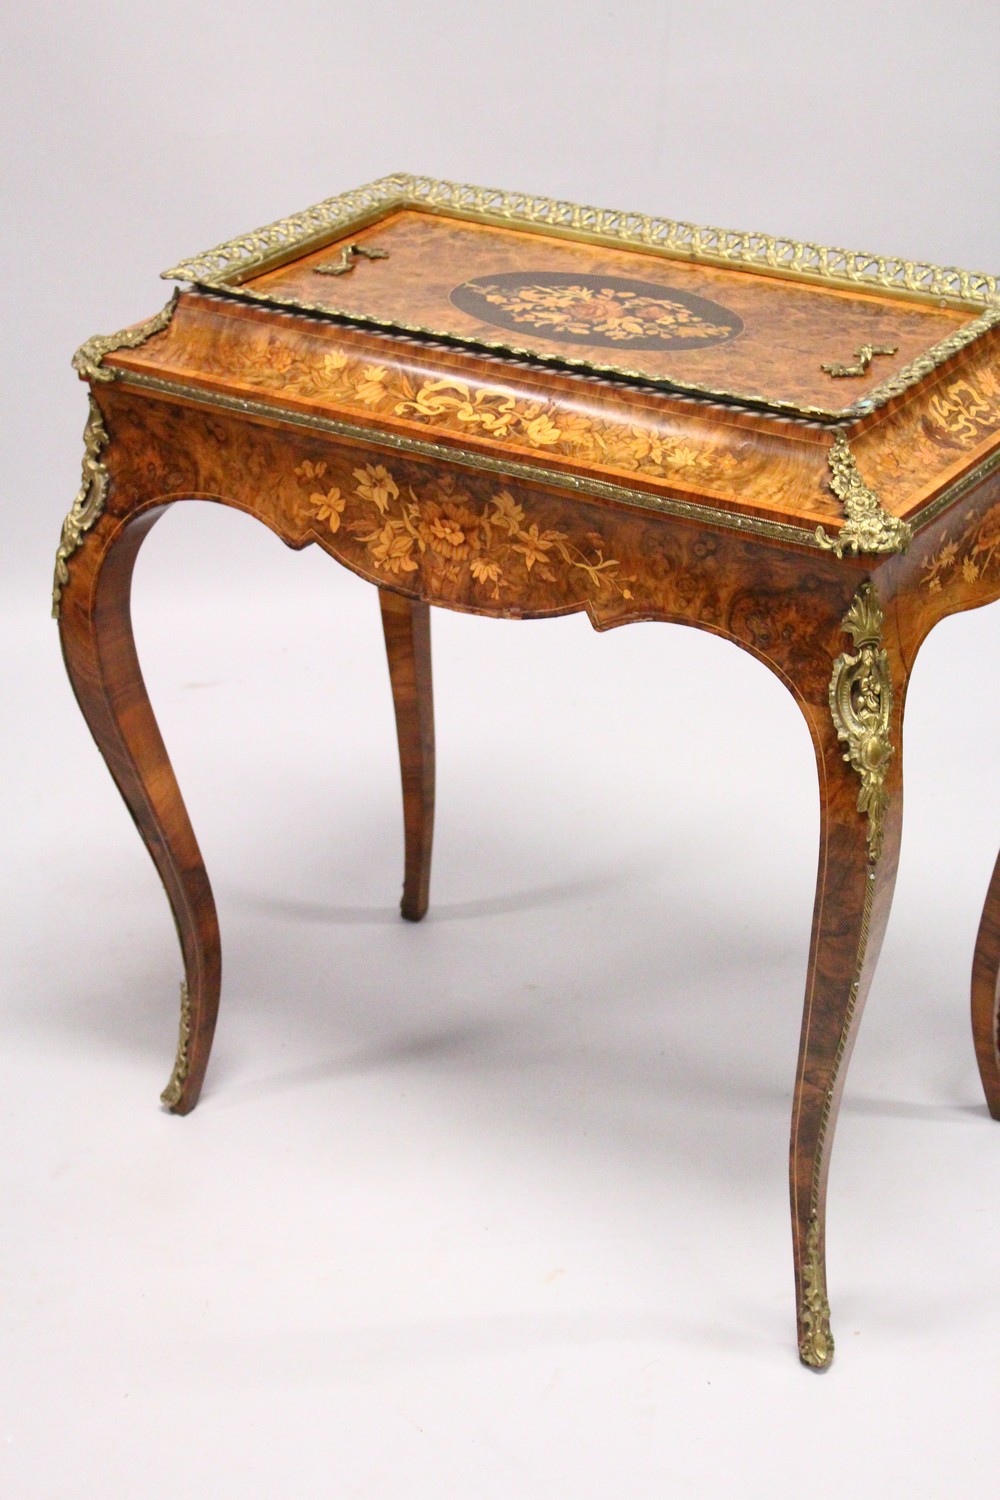 A 19TH CENTURY BURR WALNUT, ORMOLU AND MARQUETRY JARDINIERE, with removable cover, zinc liner, on - Image 9 of 10